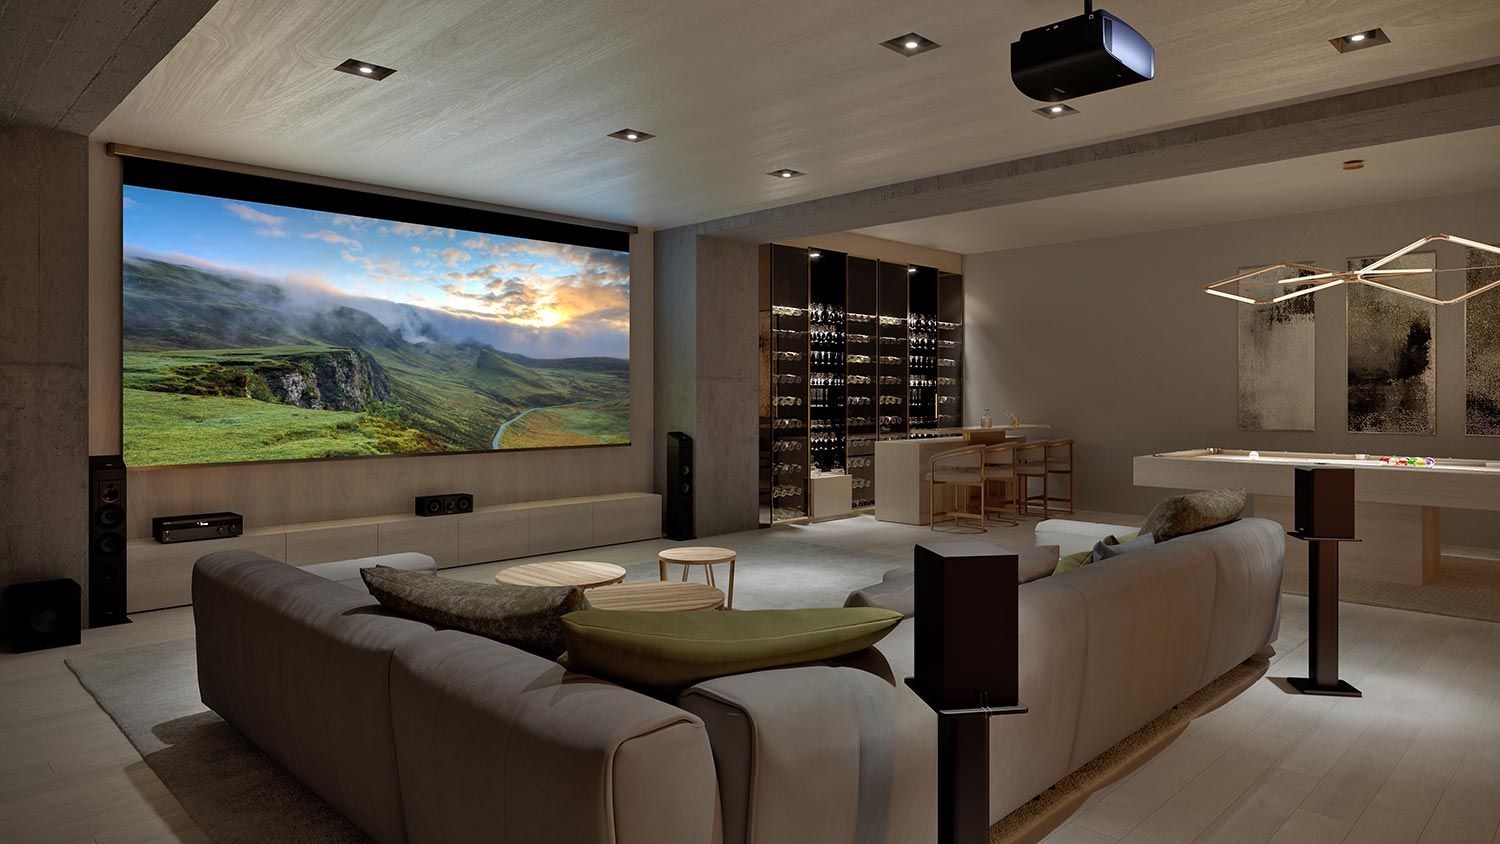 Sony Home Theater with wooden walls and ceiling in neutral colors